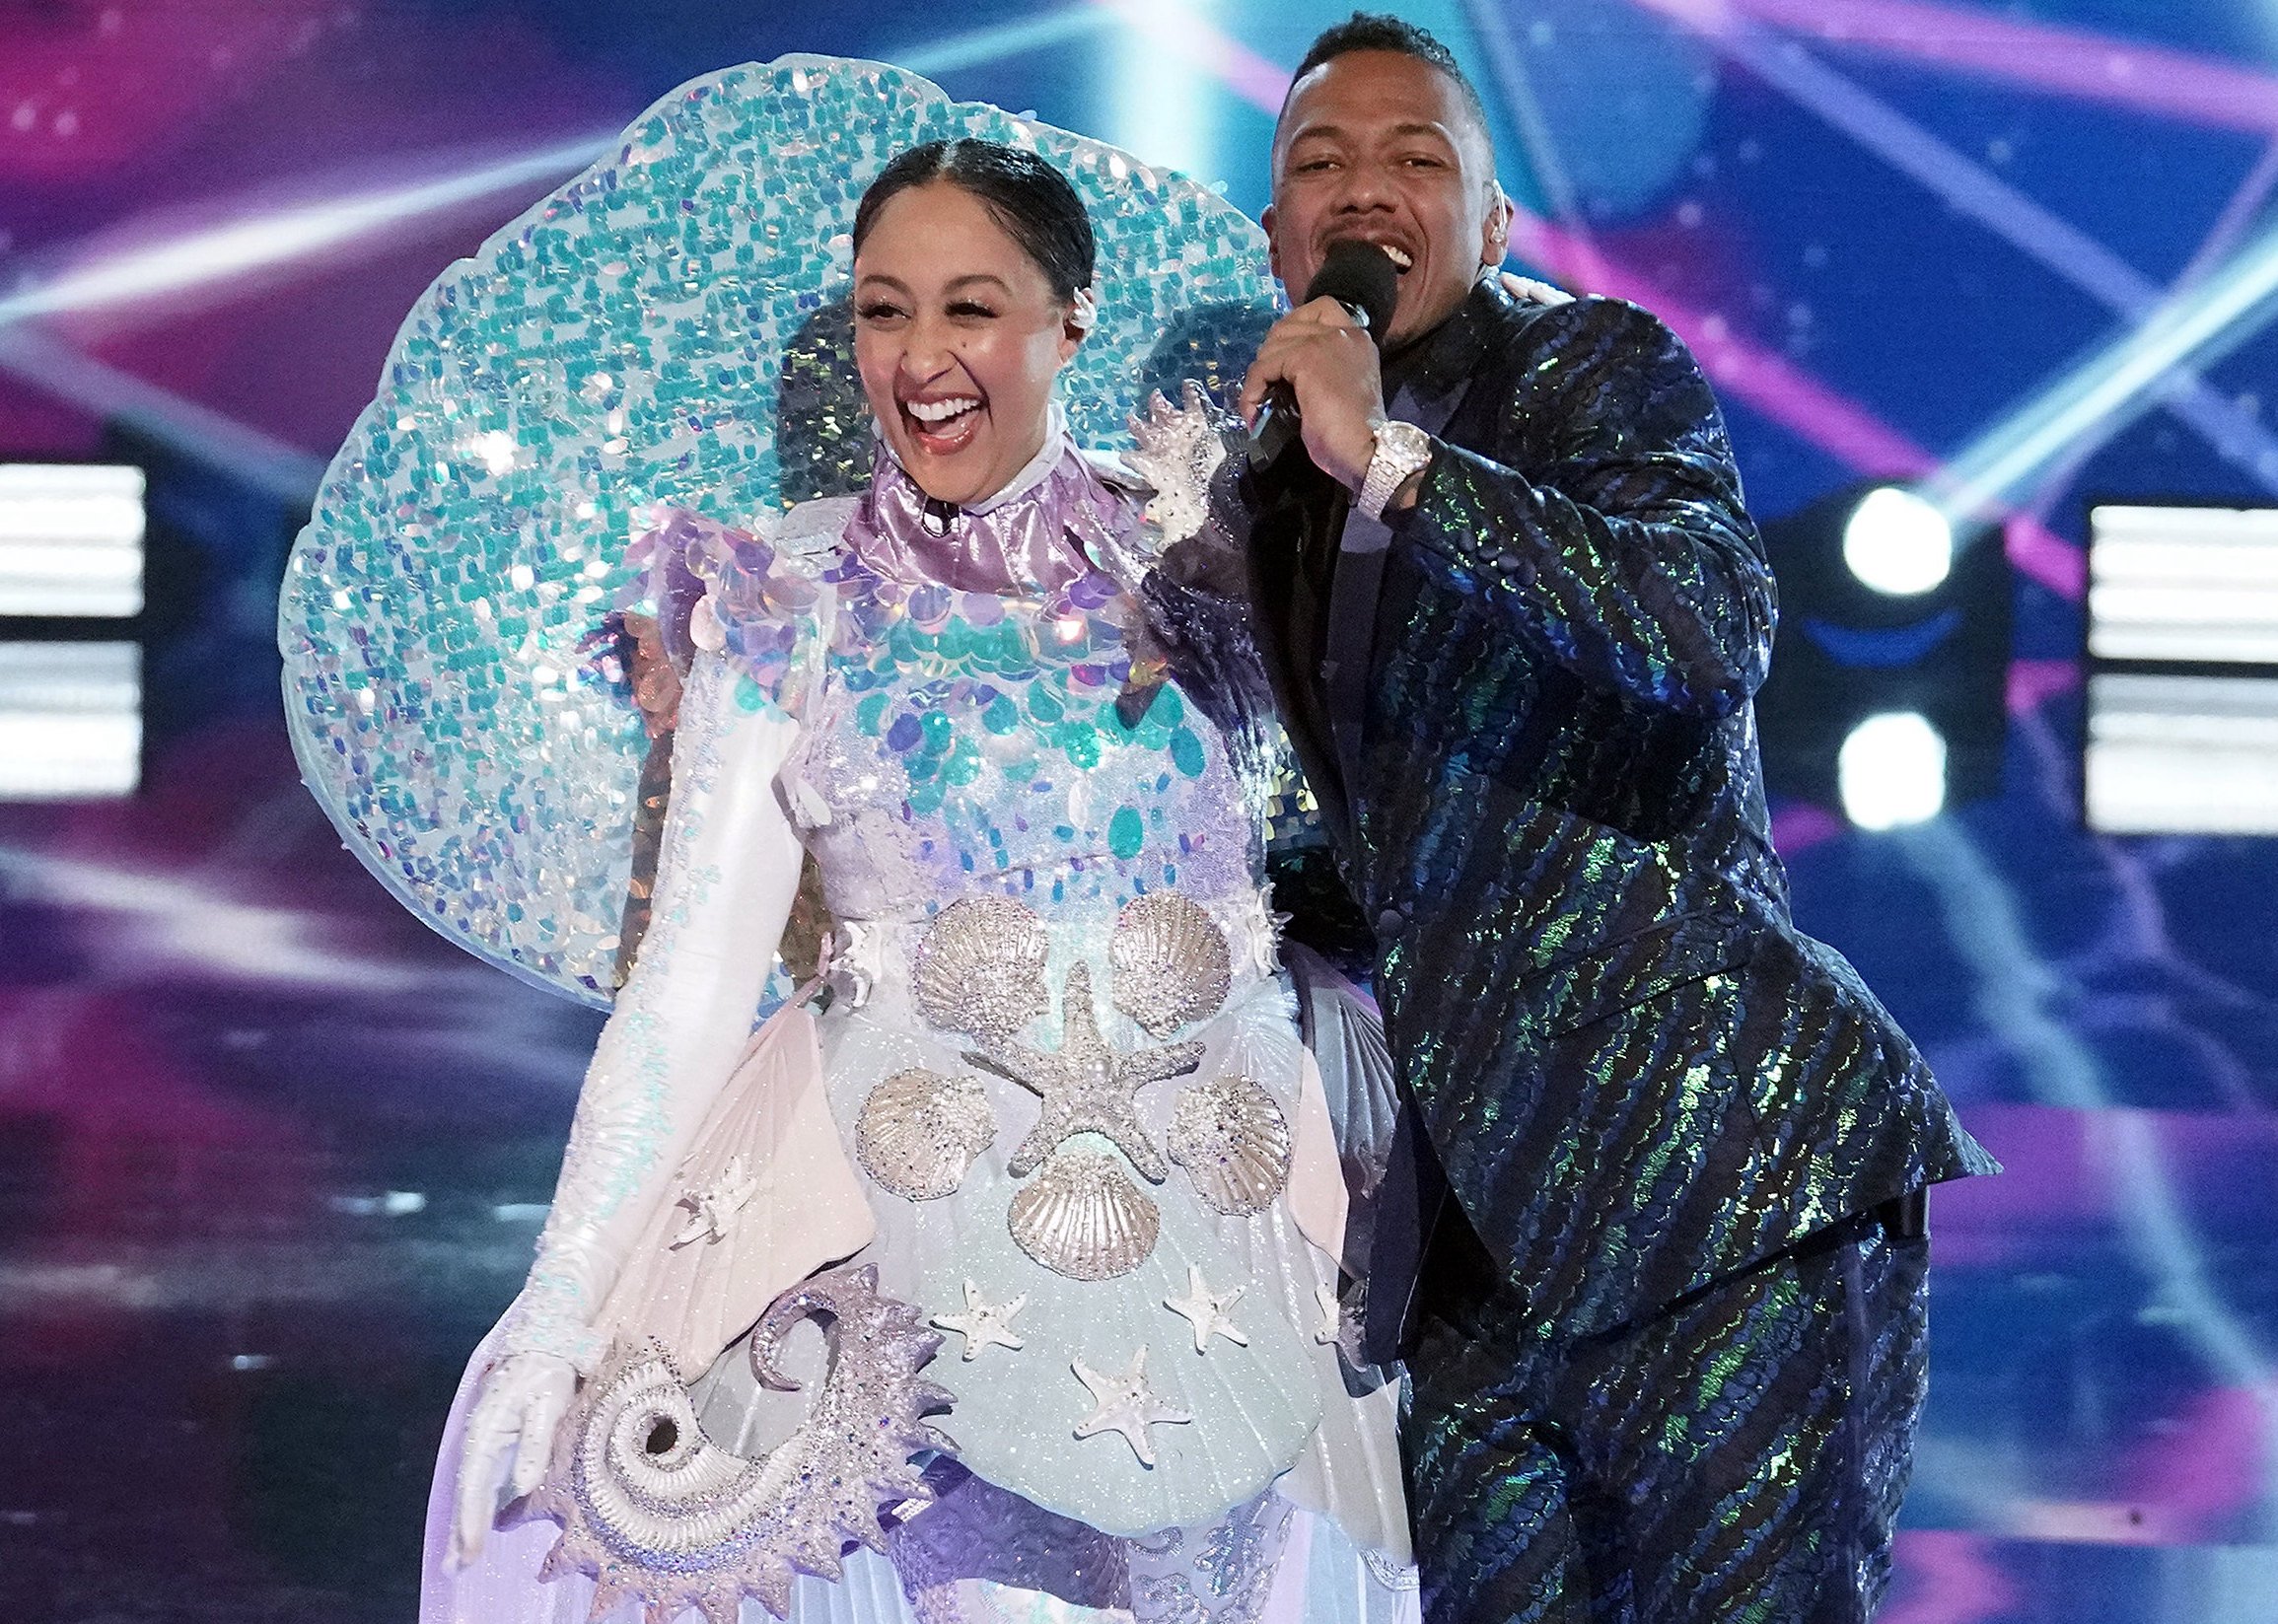 Tamera Mowry-Housley unmasked on 'The Masked Singer;' Mowry-Housley was replaced by Tori Kelly a season before because she became sick